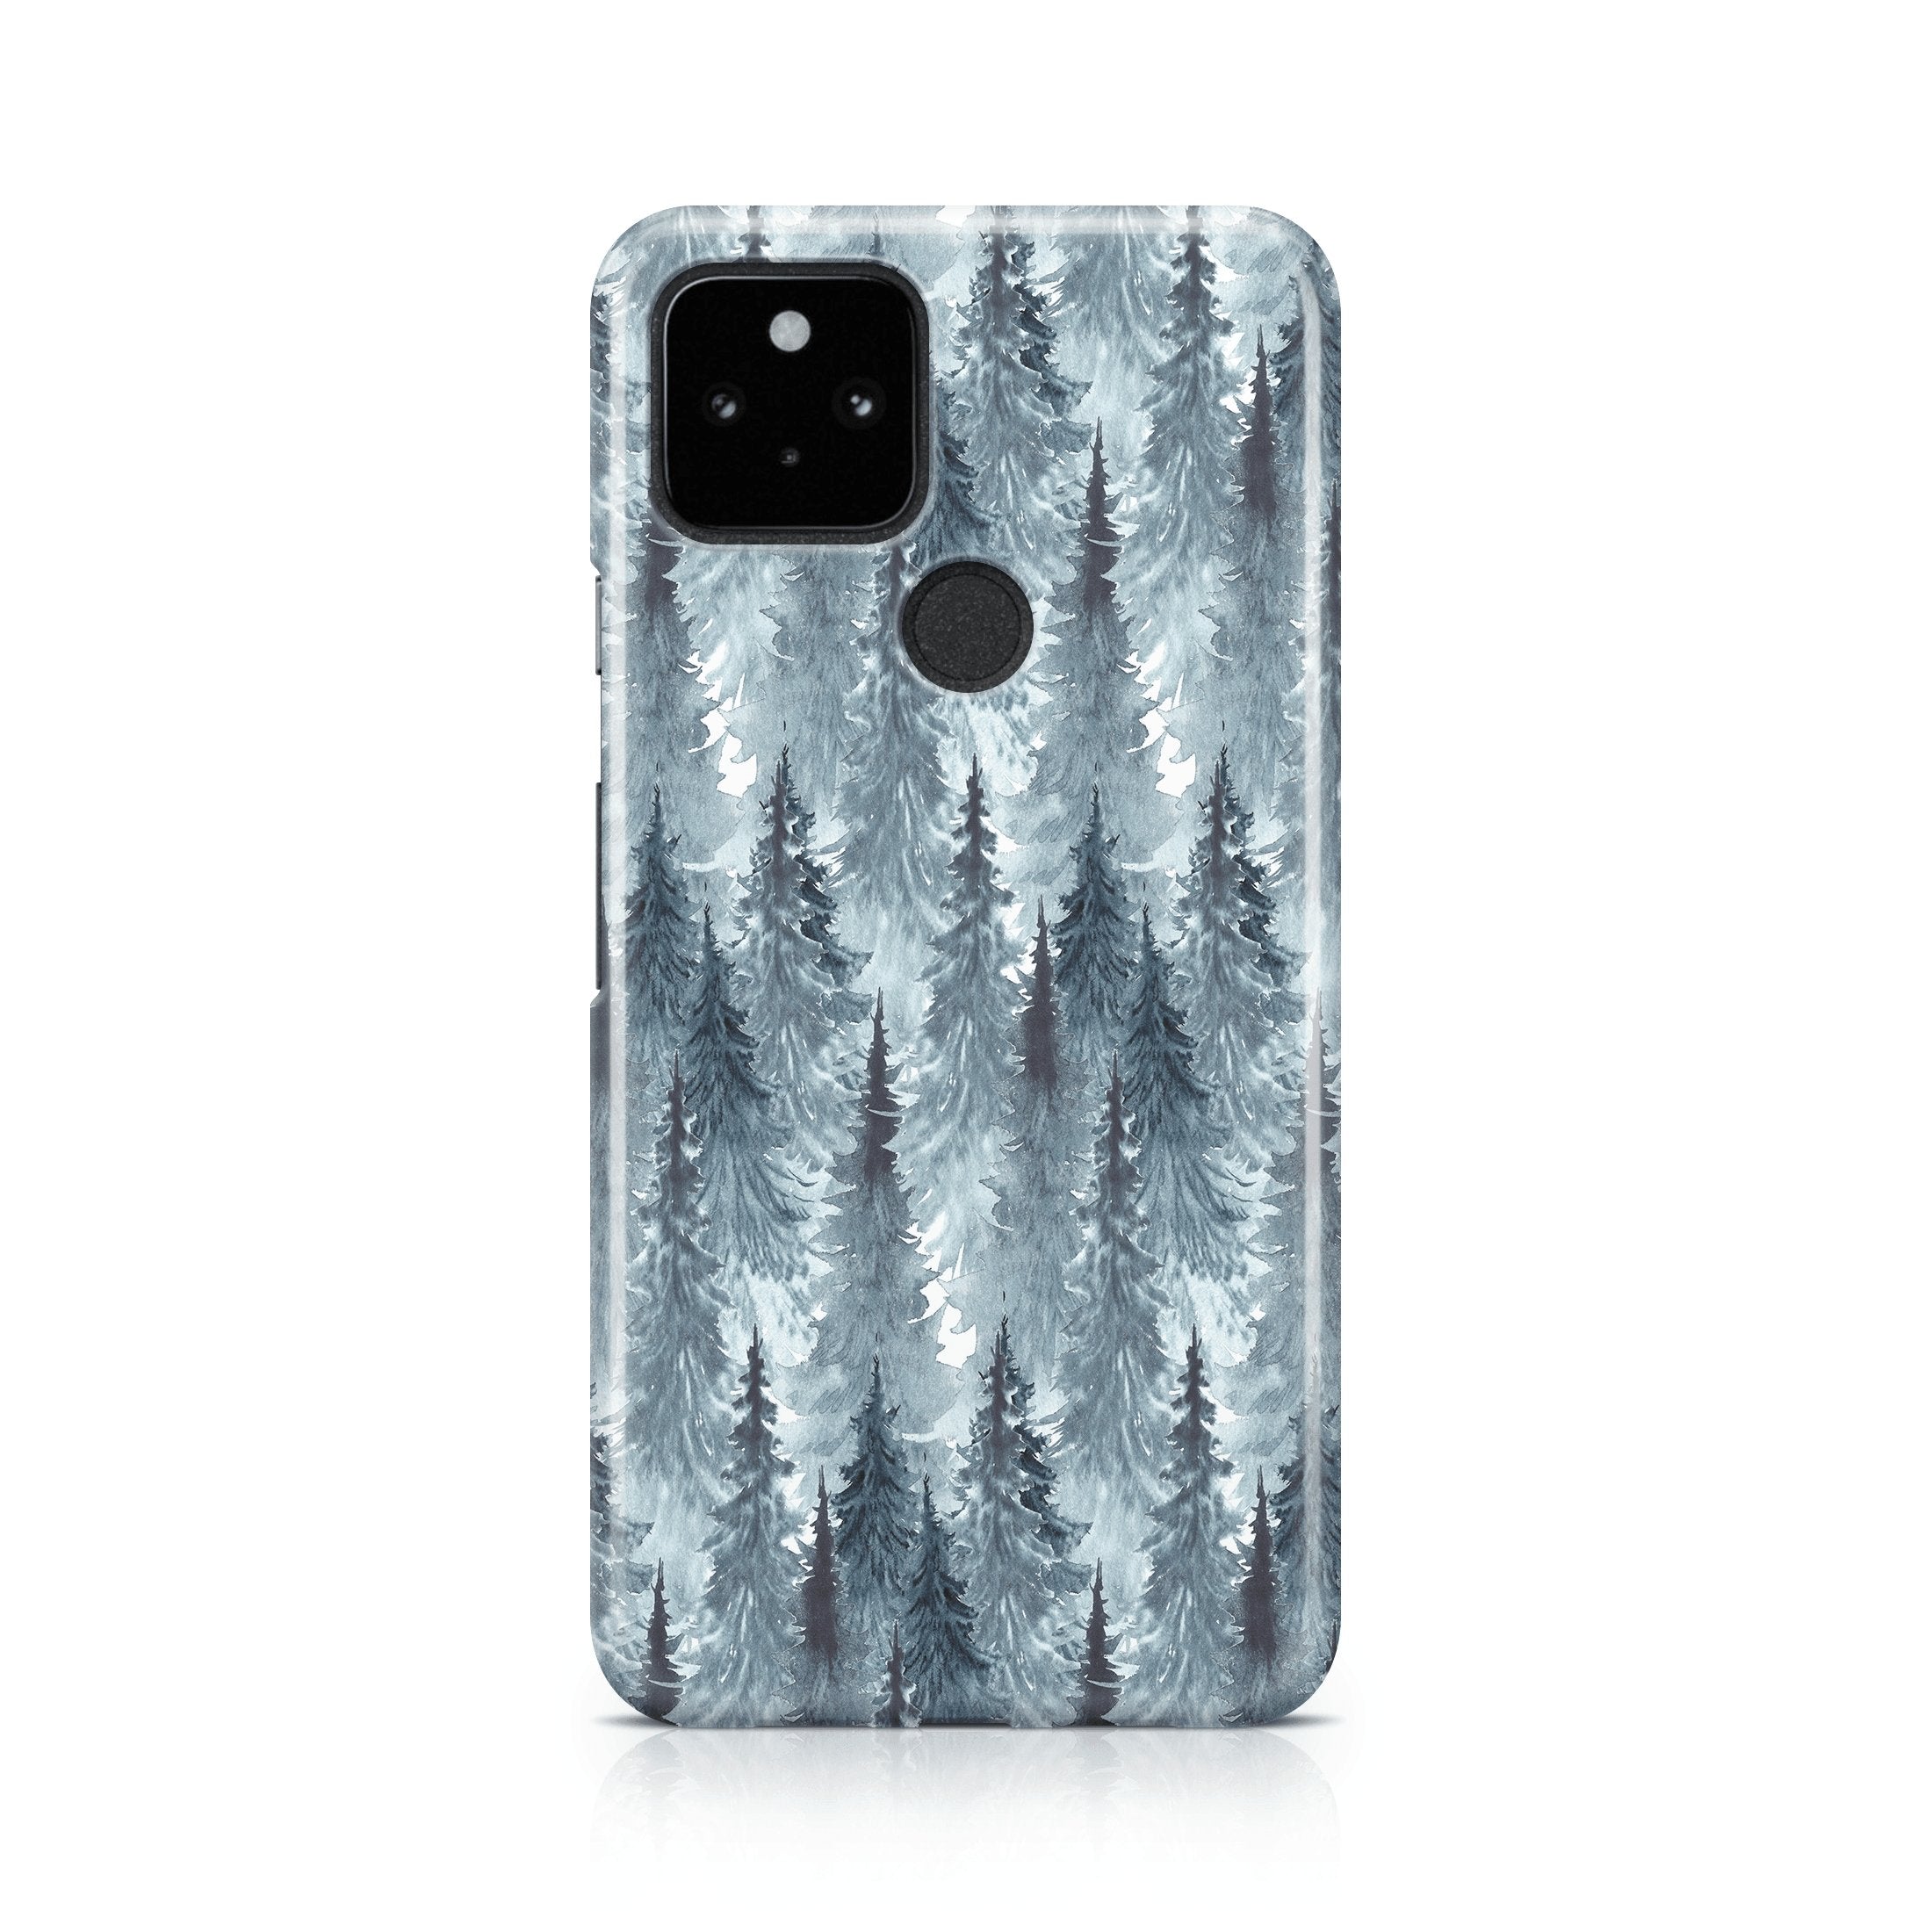 Winter Forest II - Google phone case designs by CaseSwagger